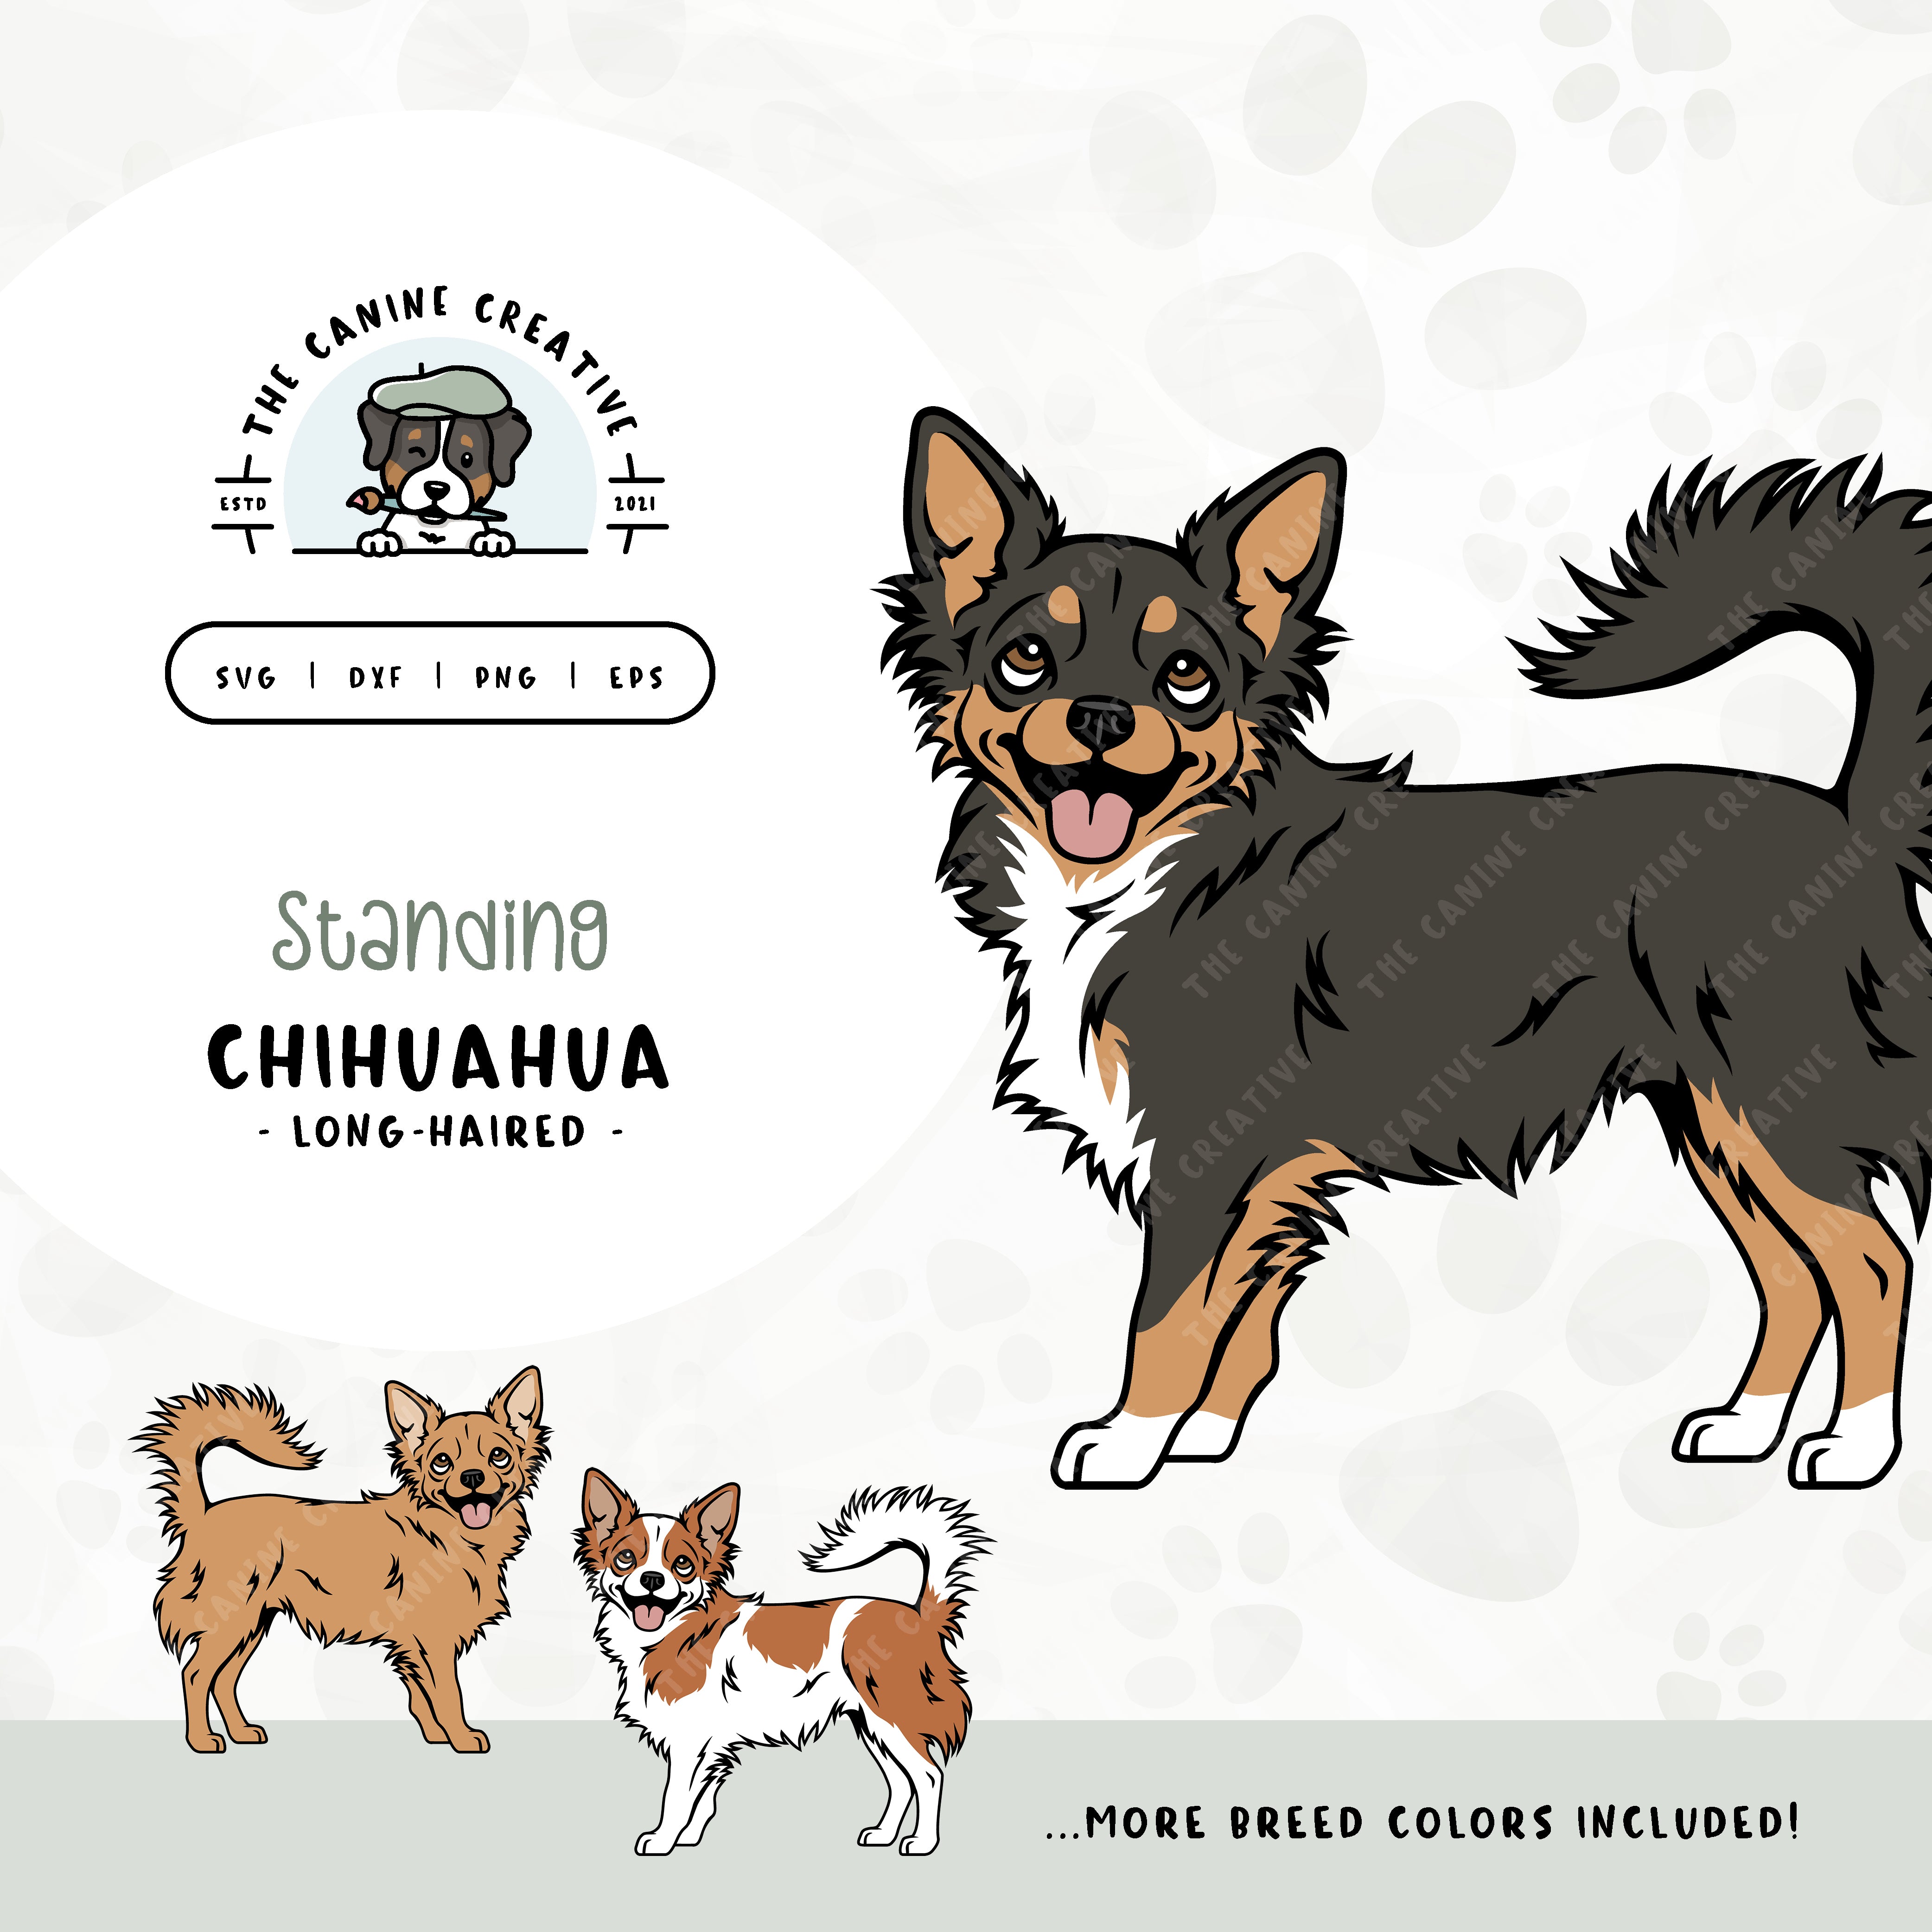 This standing dog design features a Long Haired Chihuahua. File formats include: SVG, DXF, PNG, and EPS.